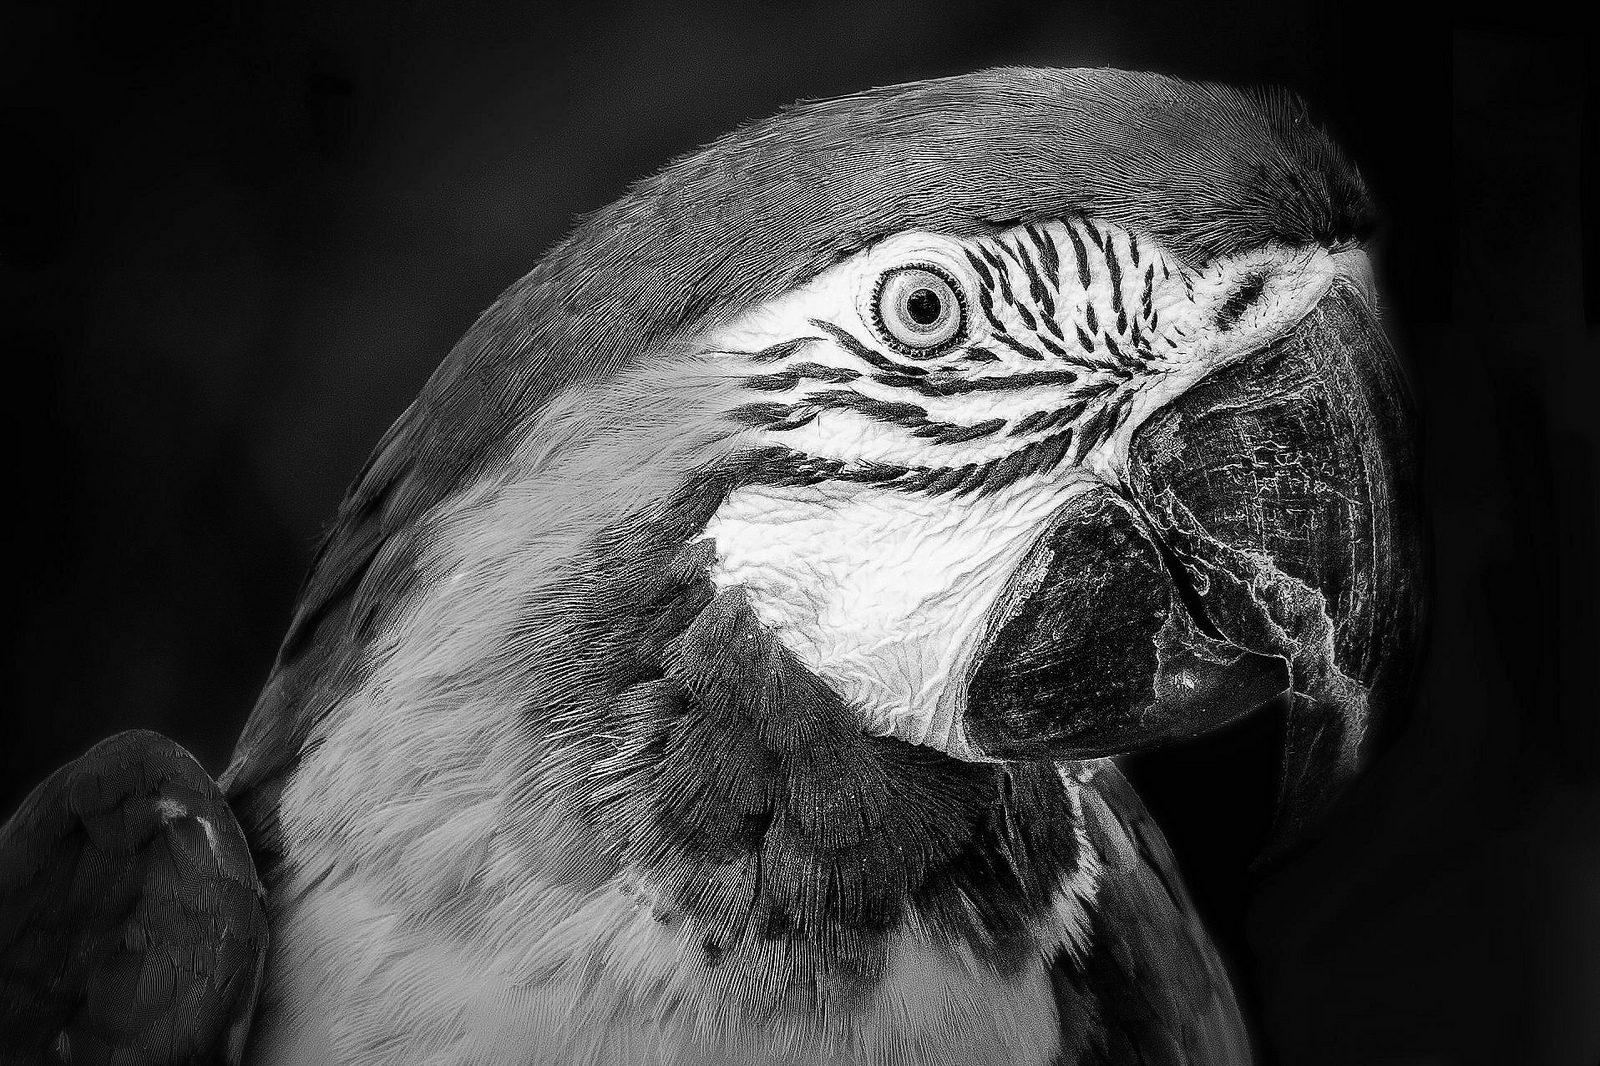 Black and white close up photo of an ara parrot.